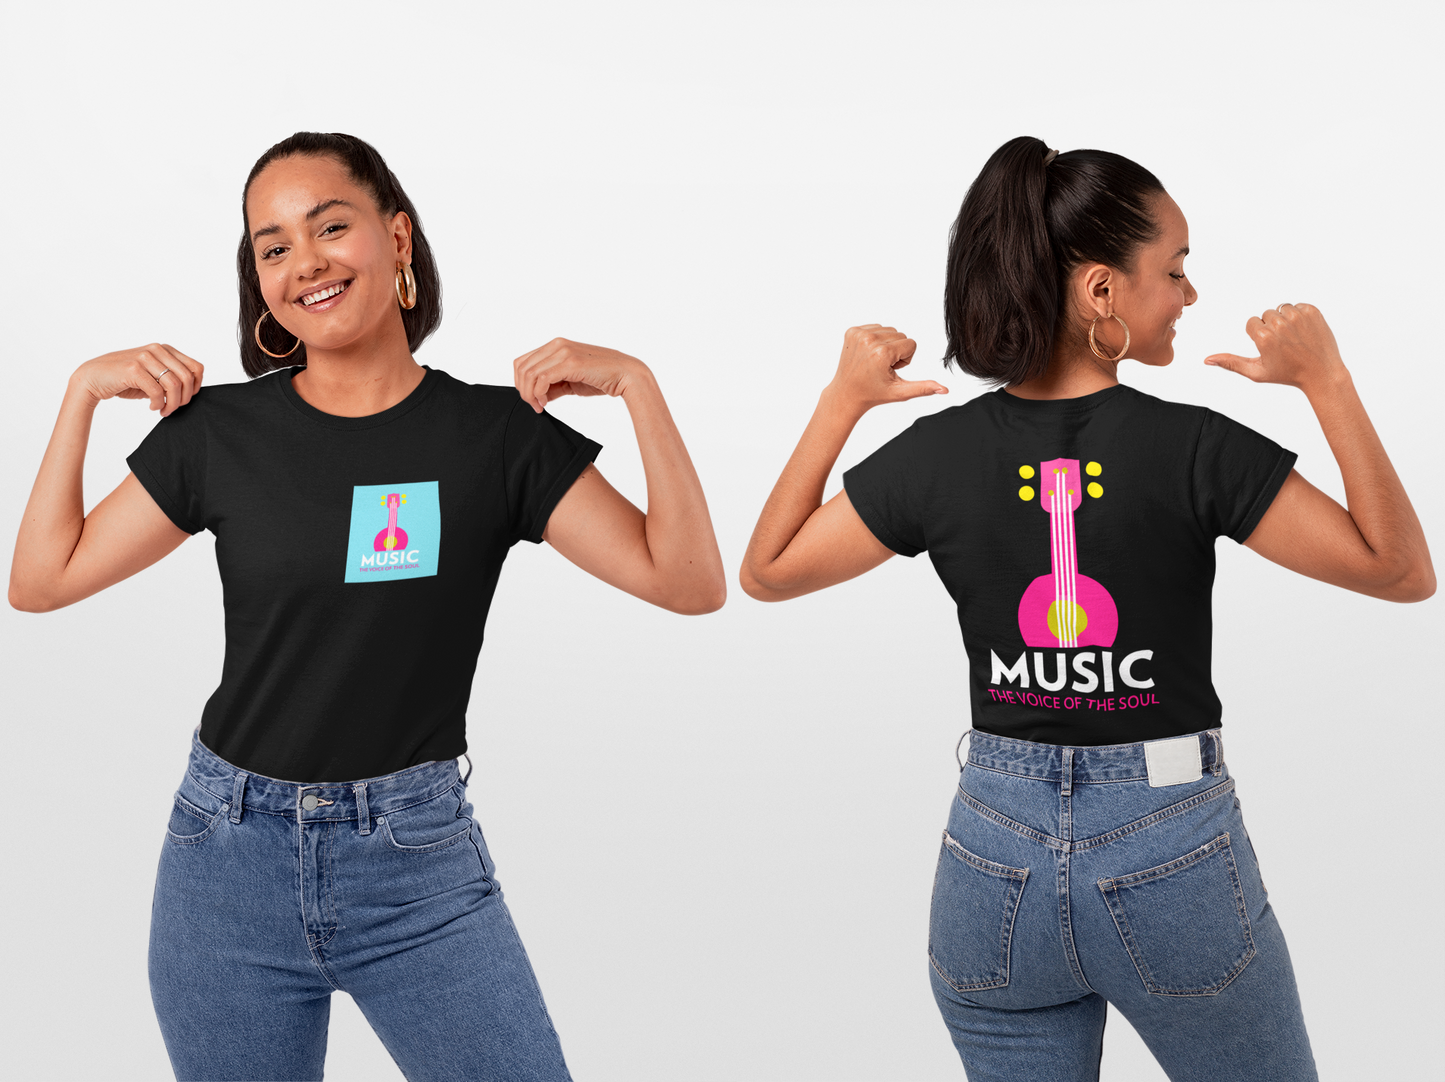 Music The Voice Of The Soul Back Graphic Black T-Shirt For Women